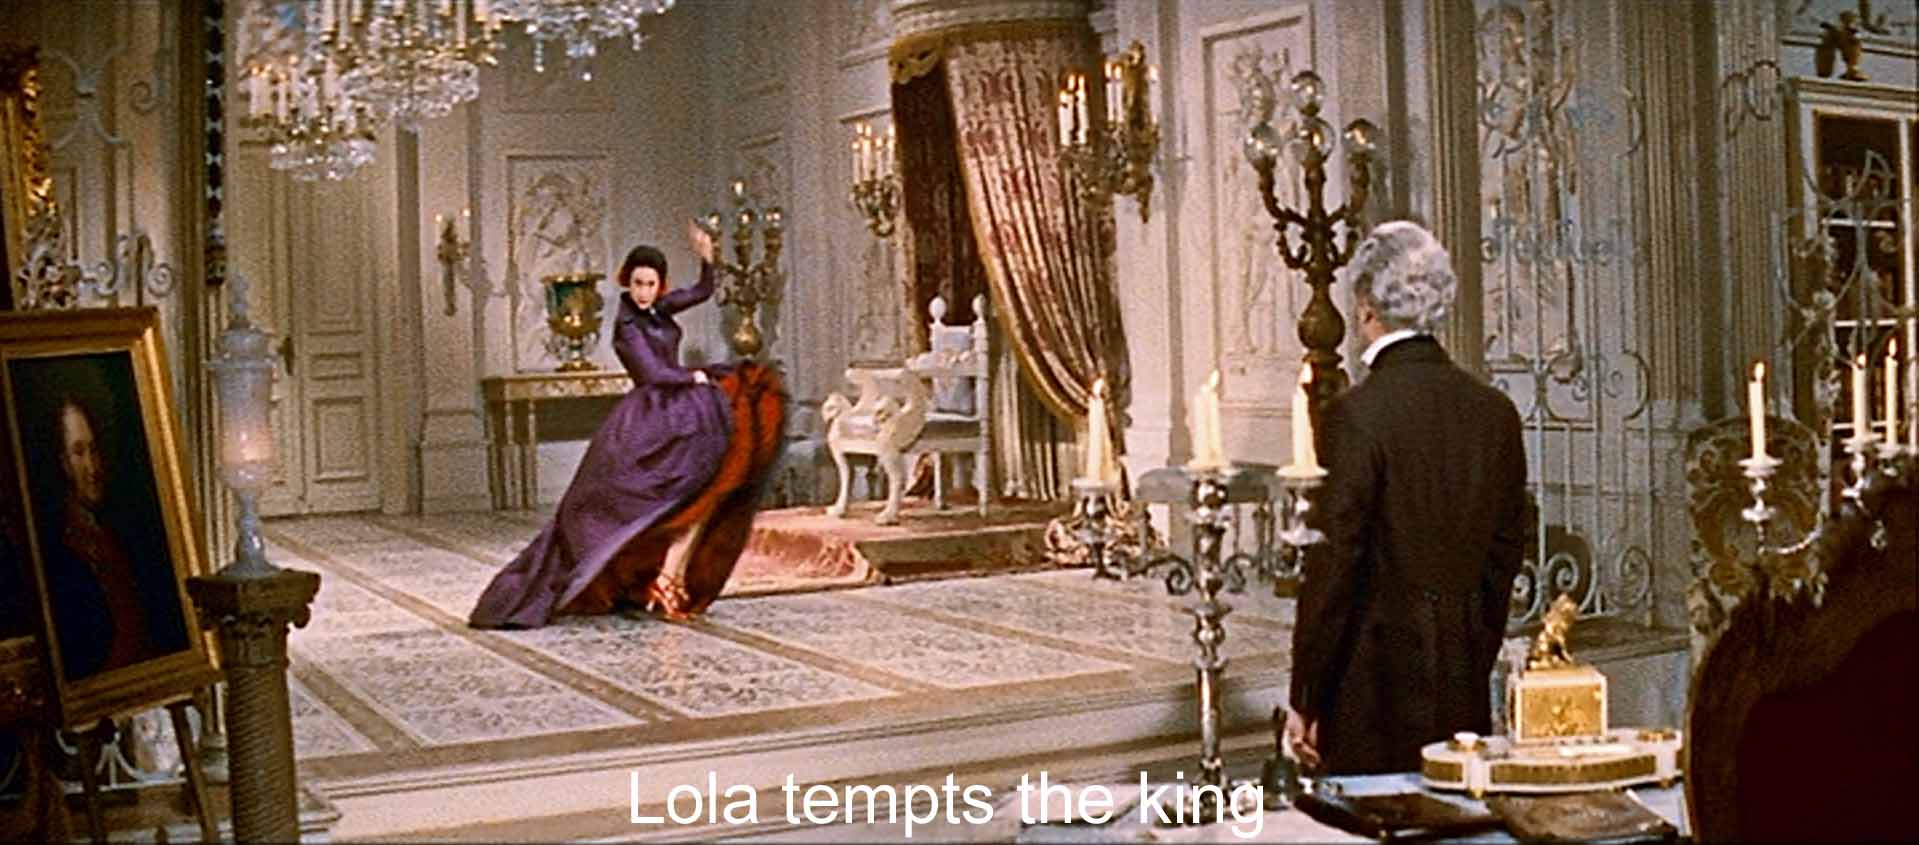 Lola tempts the king